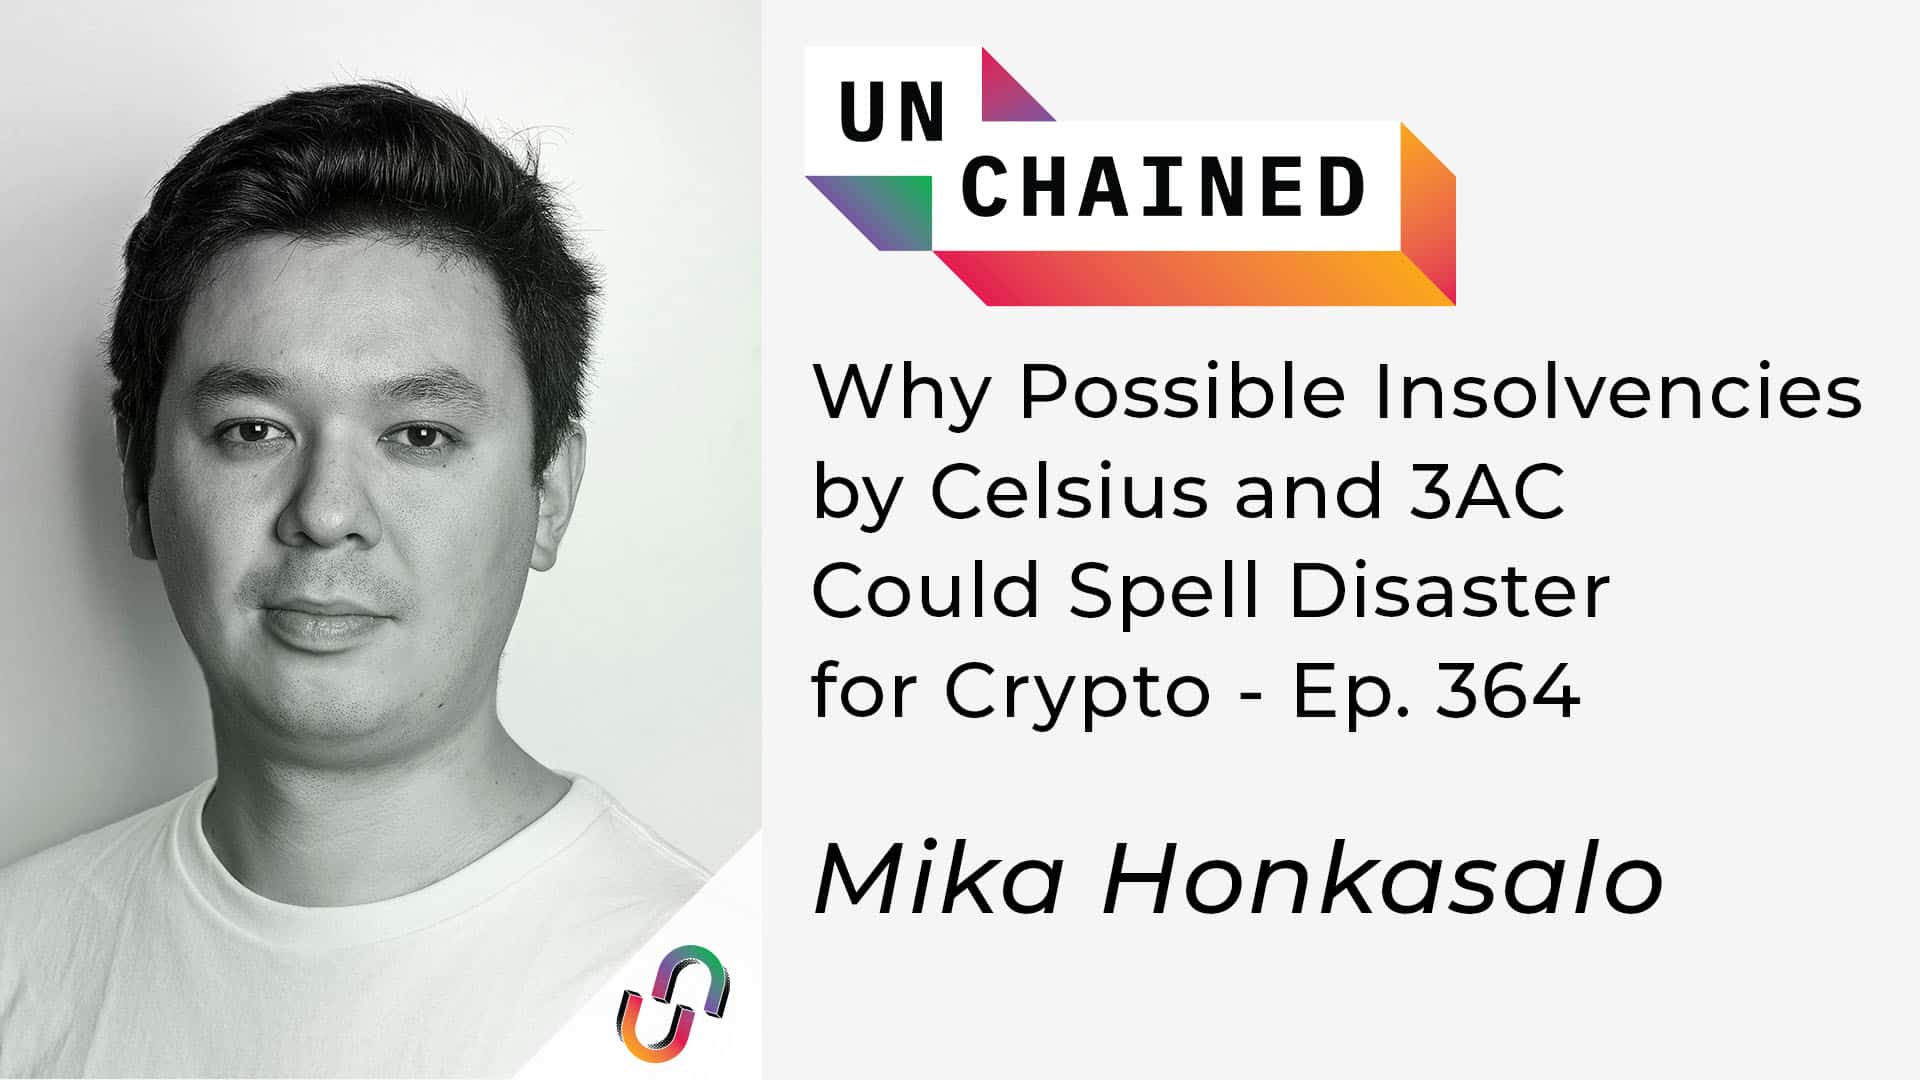 Why Possible Insolvencies by Celsius and 3AC Could Spell Disaster for Crypto - Ep. 364